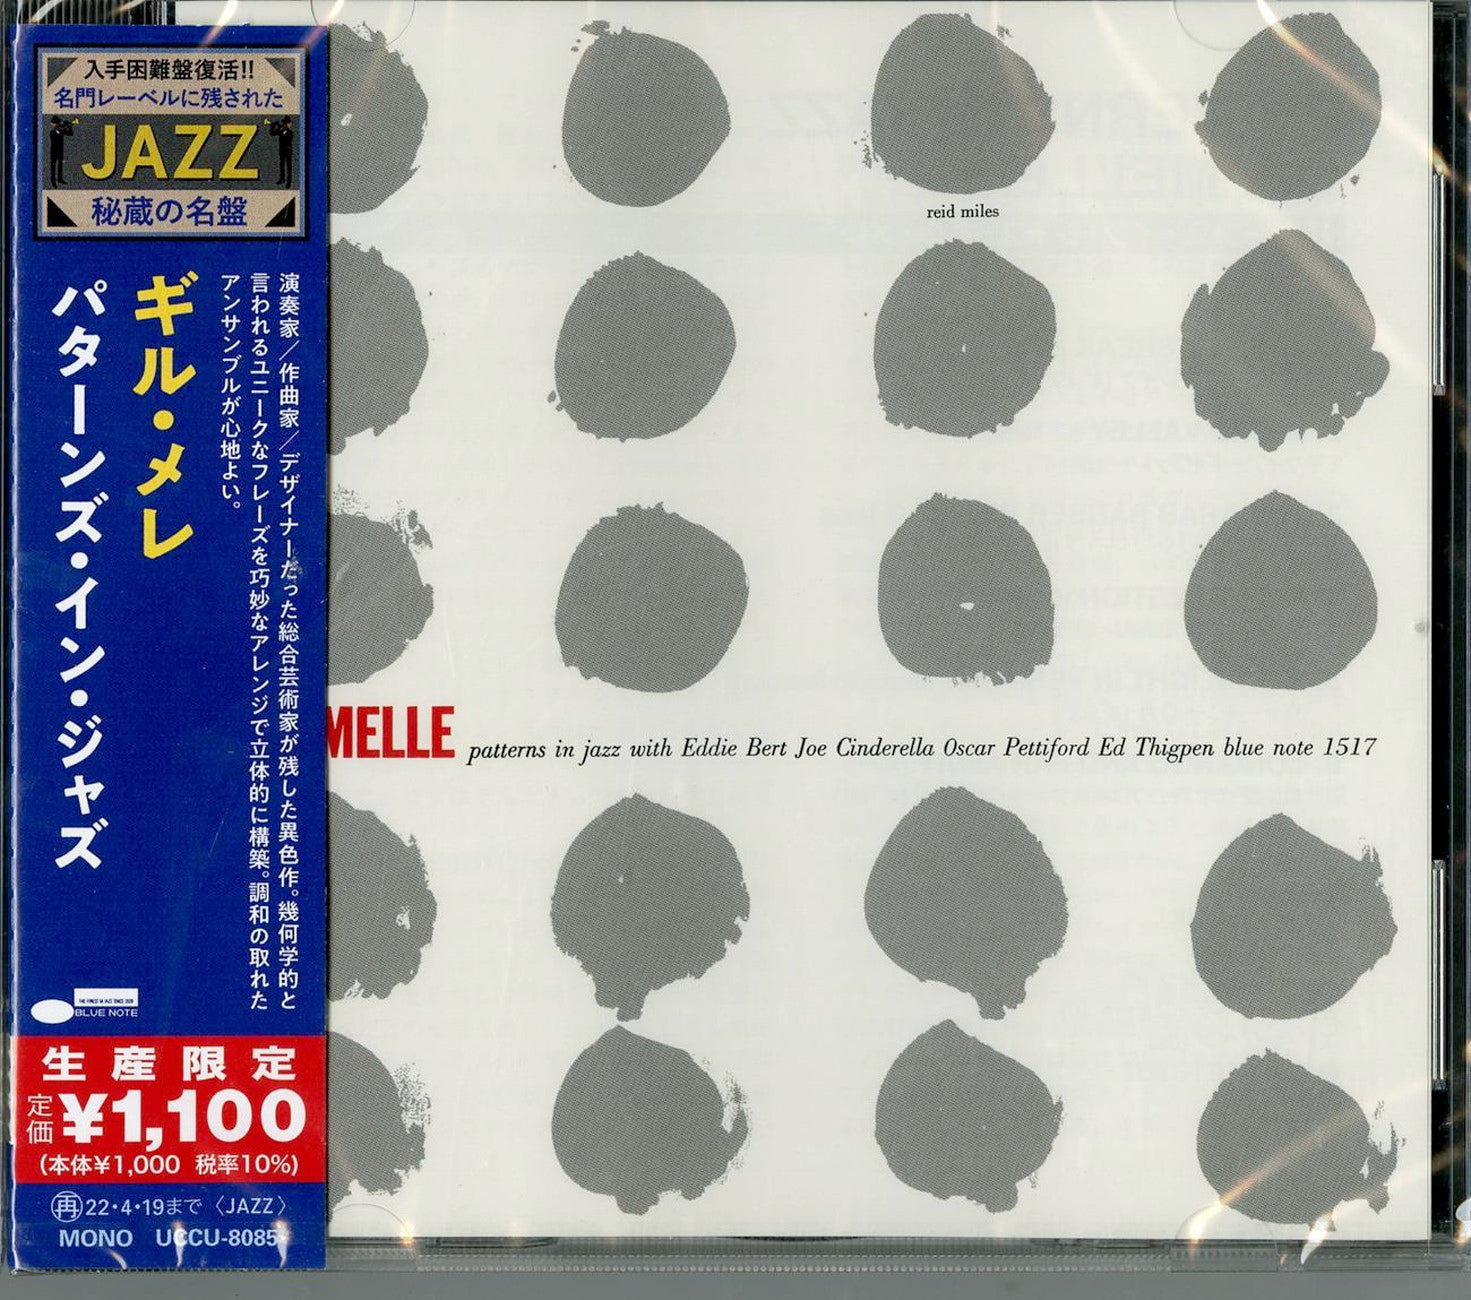 Gil Melle - Patterns In Jazz - Japan CD Limited Edition – CDs